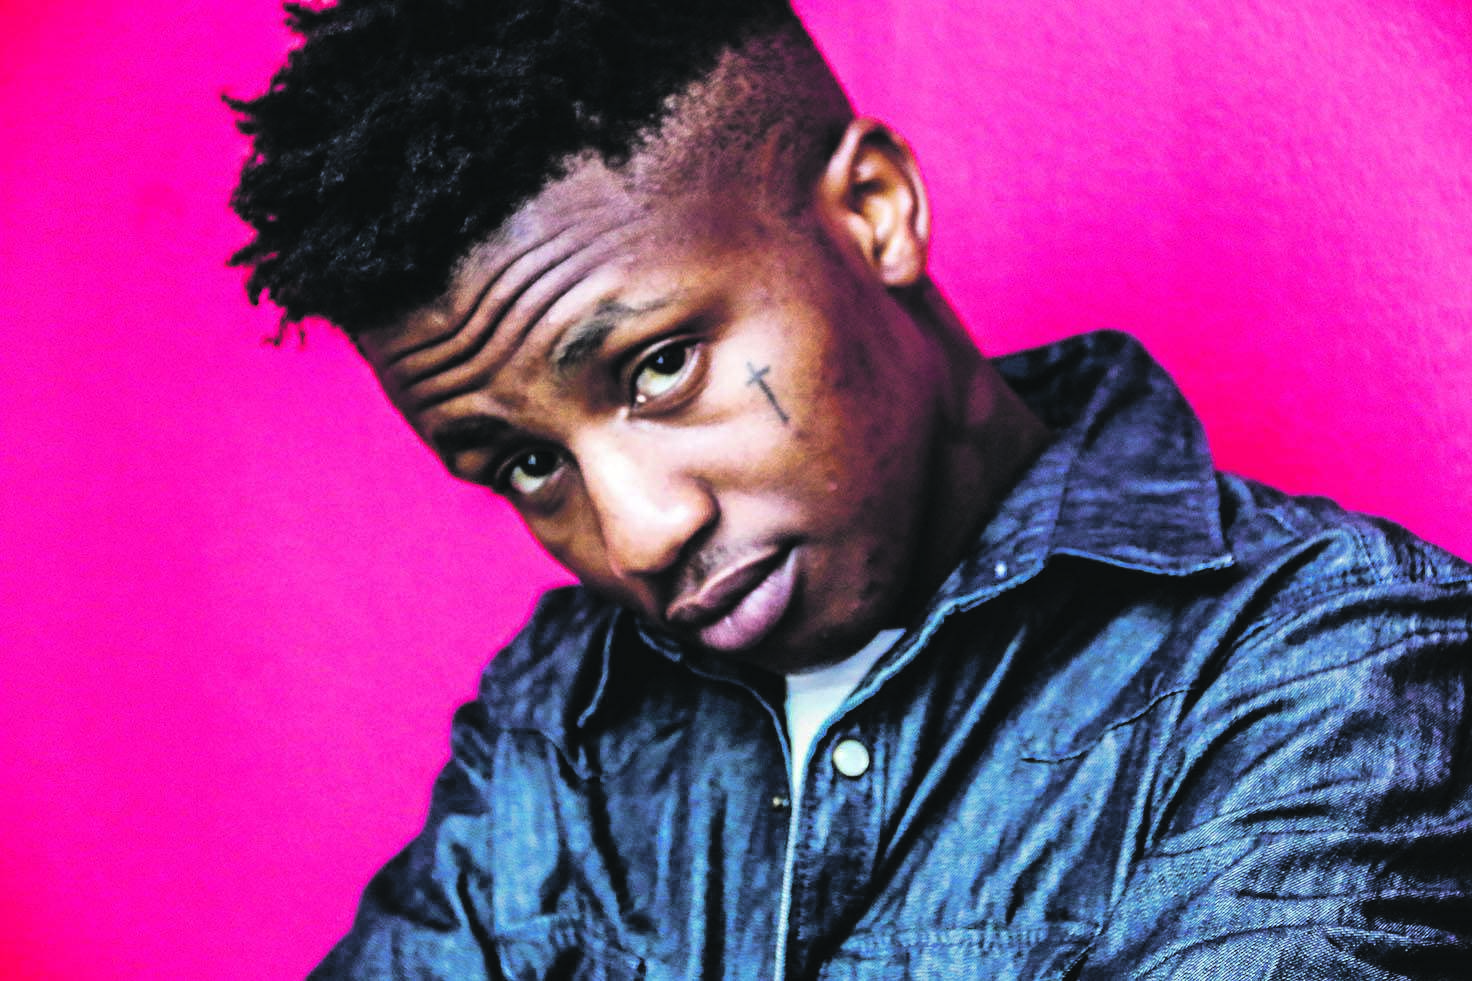 Emtee says he is staying at Ambitiouz Entertainment. He says his focus is on bouncing back with a hit song, in spite of the trouble that’s followed him in the recent pastPHOTO: phelokazi mbude